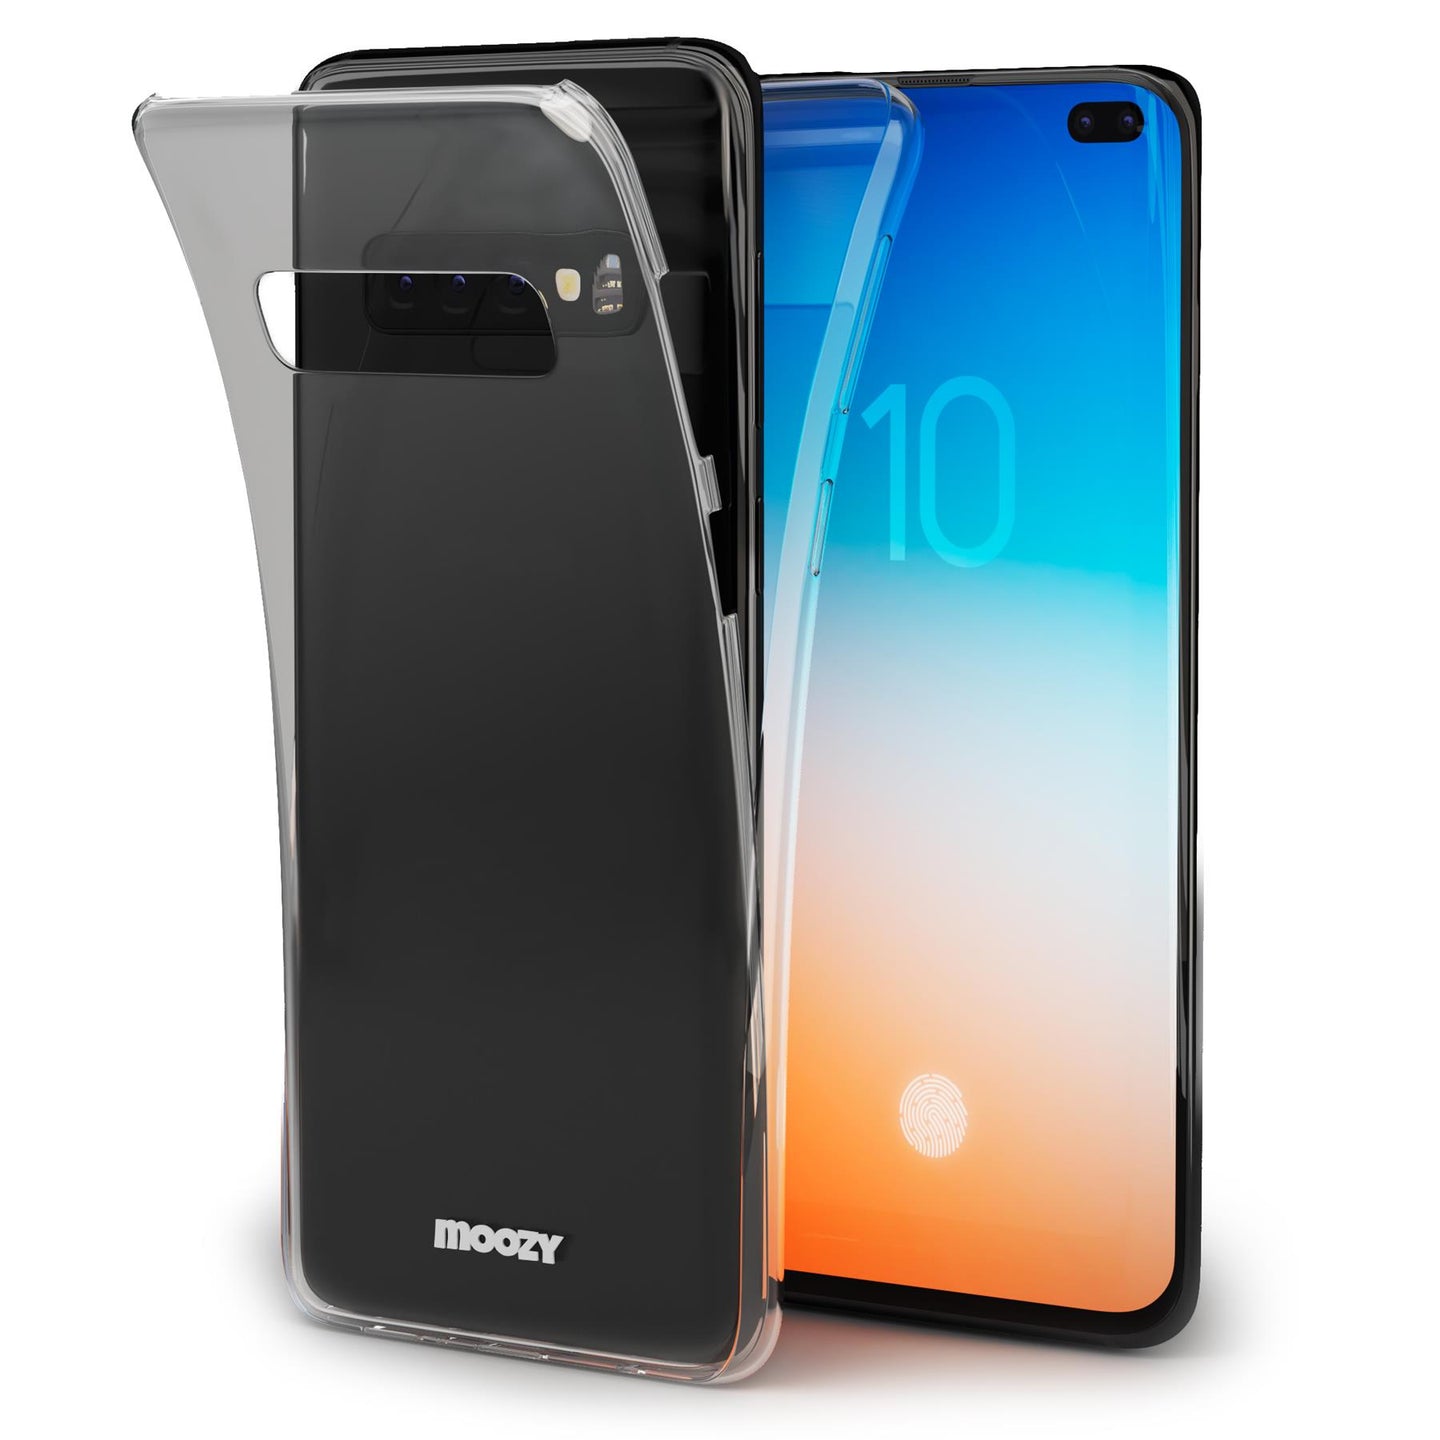 Moozy 360 Degree Case for Samsung S10 Plus - Full body Front and Back Slim Clear Transparent TPU Silicone Gel Cover